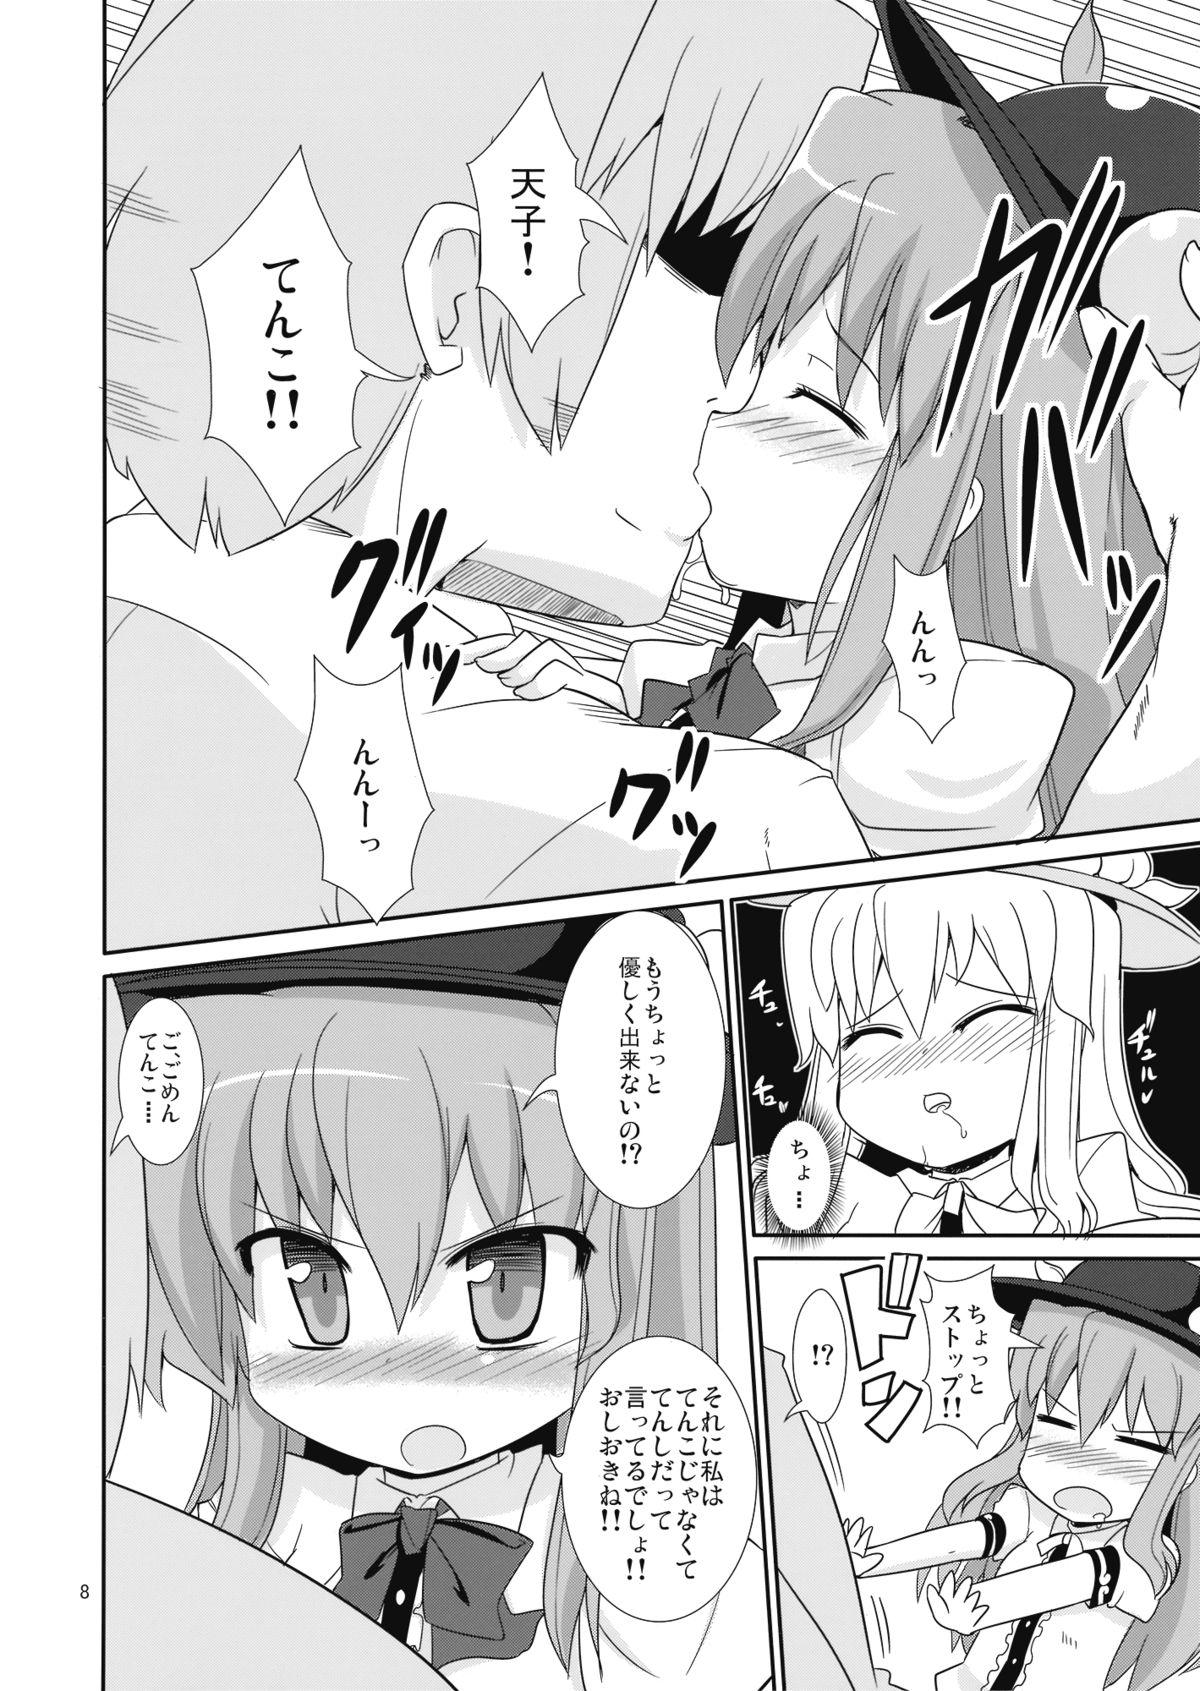 Fucking Pussy Flash Back - Touhou project Indonesia - Page 8